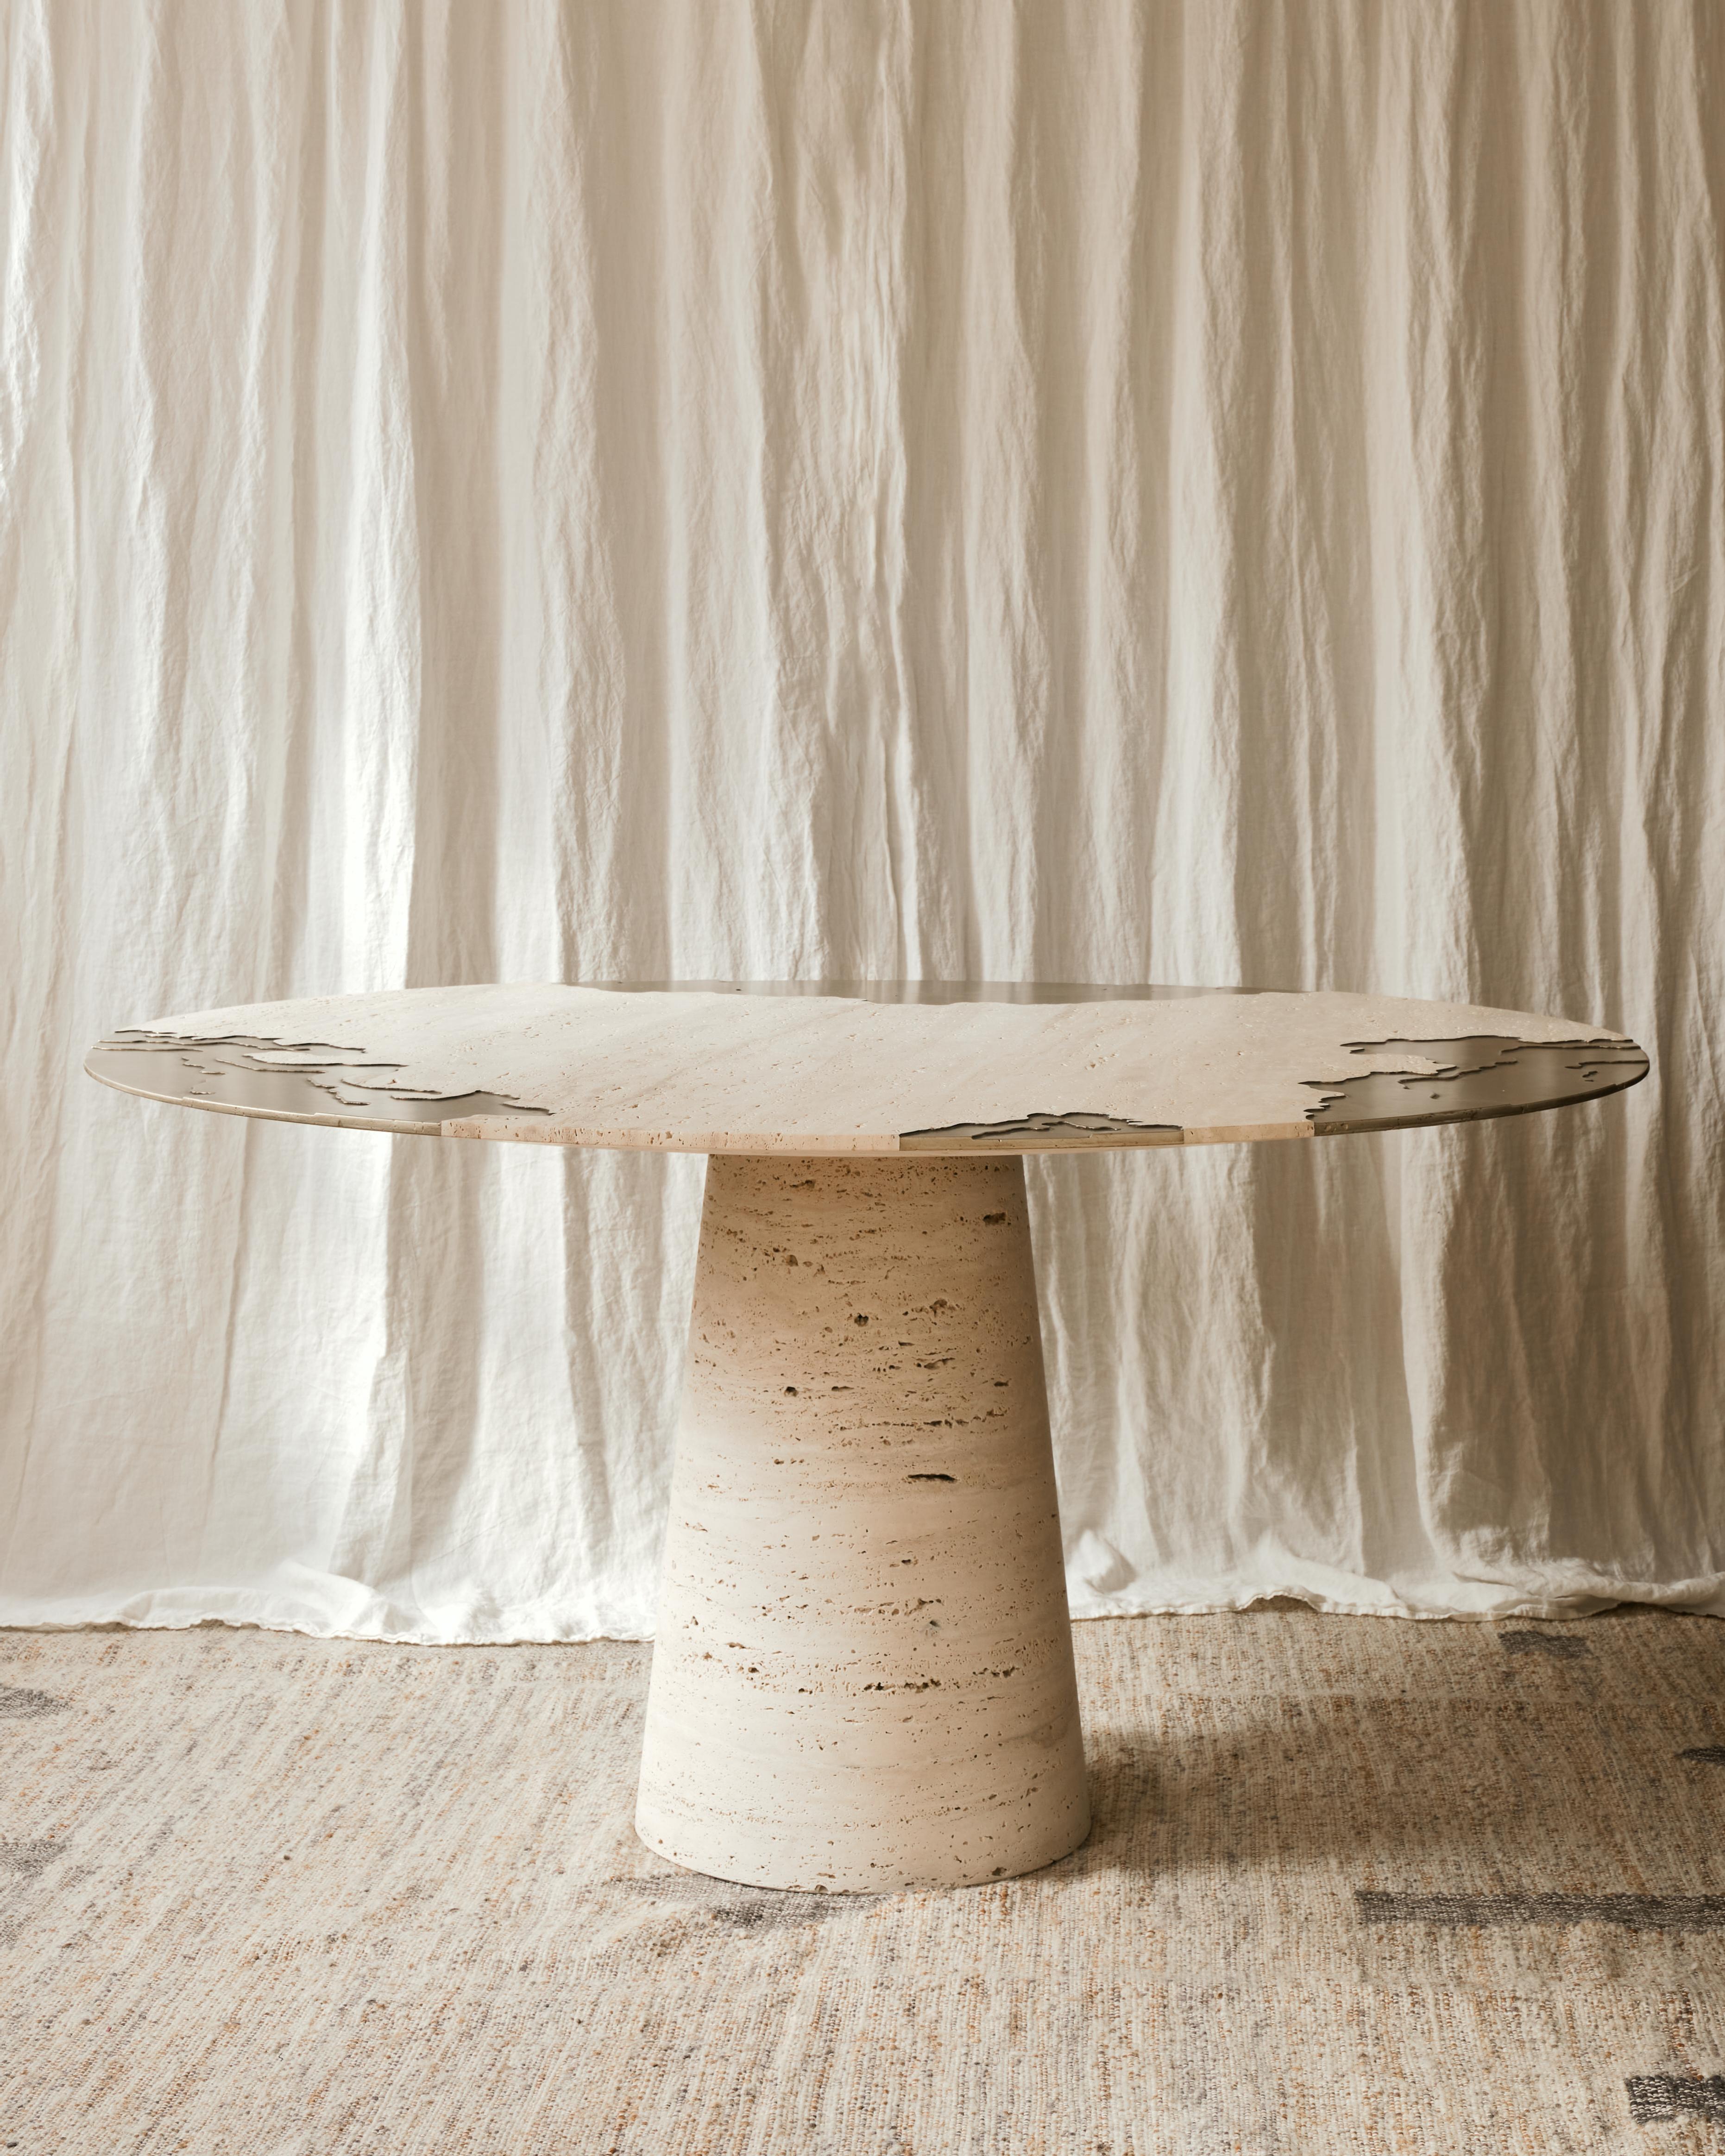 Portonovo Table by Studio Sam London
Dimensions: ⌀ 145 x H 75 cm
Materials: Honed Travertine and Liquid Metal

The Portonovo dining table is the very first piece created for Studio Sam Collection. Made of the whitest travertine, the top surface is